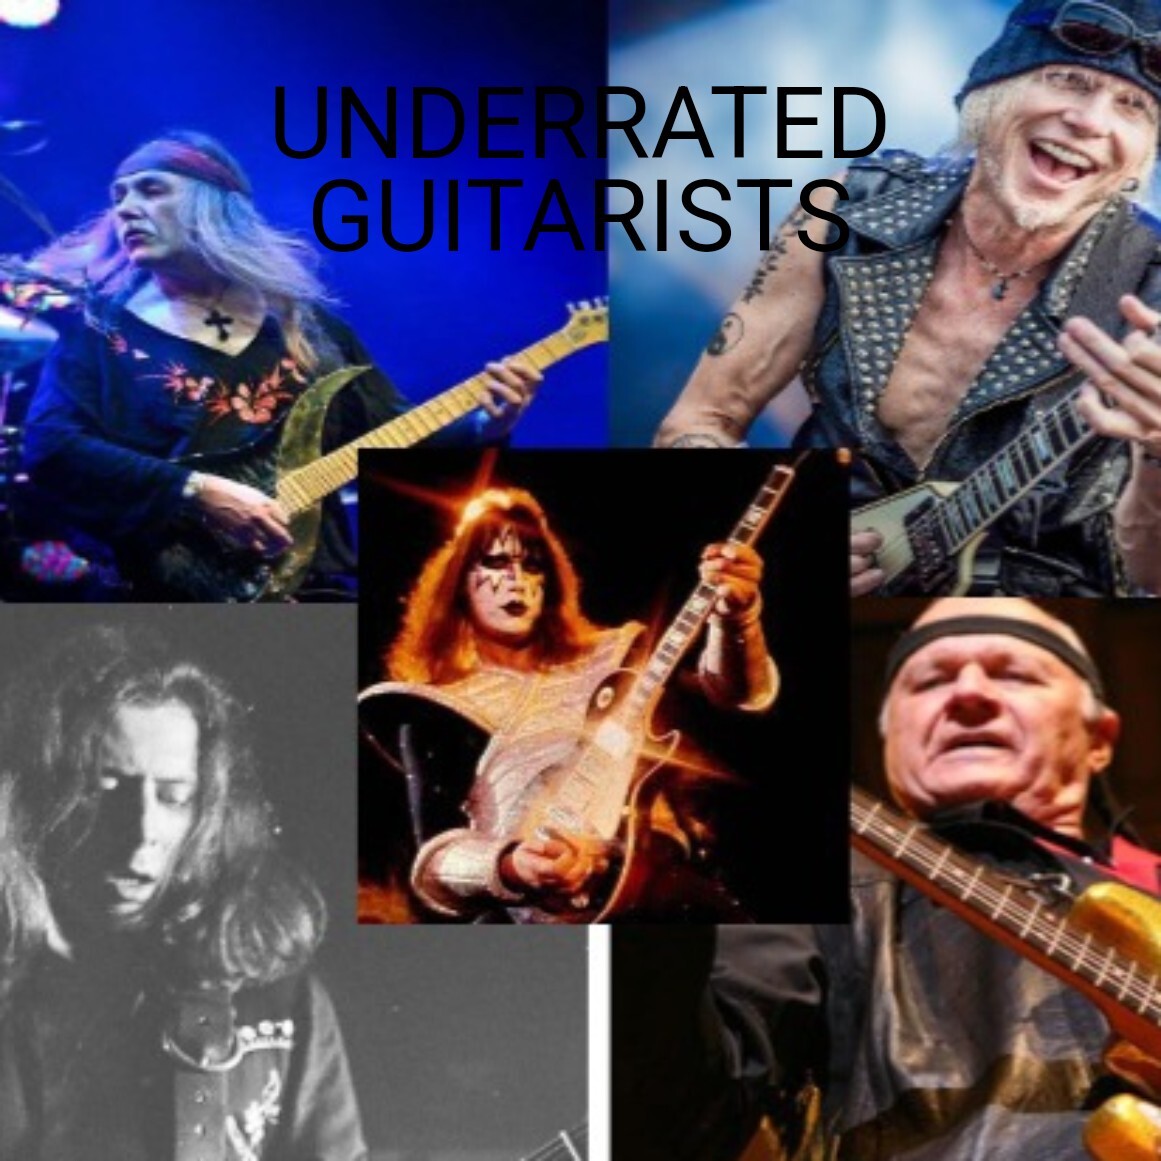 Underrated guitarists!